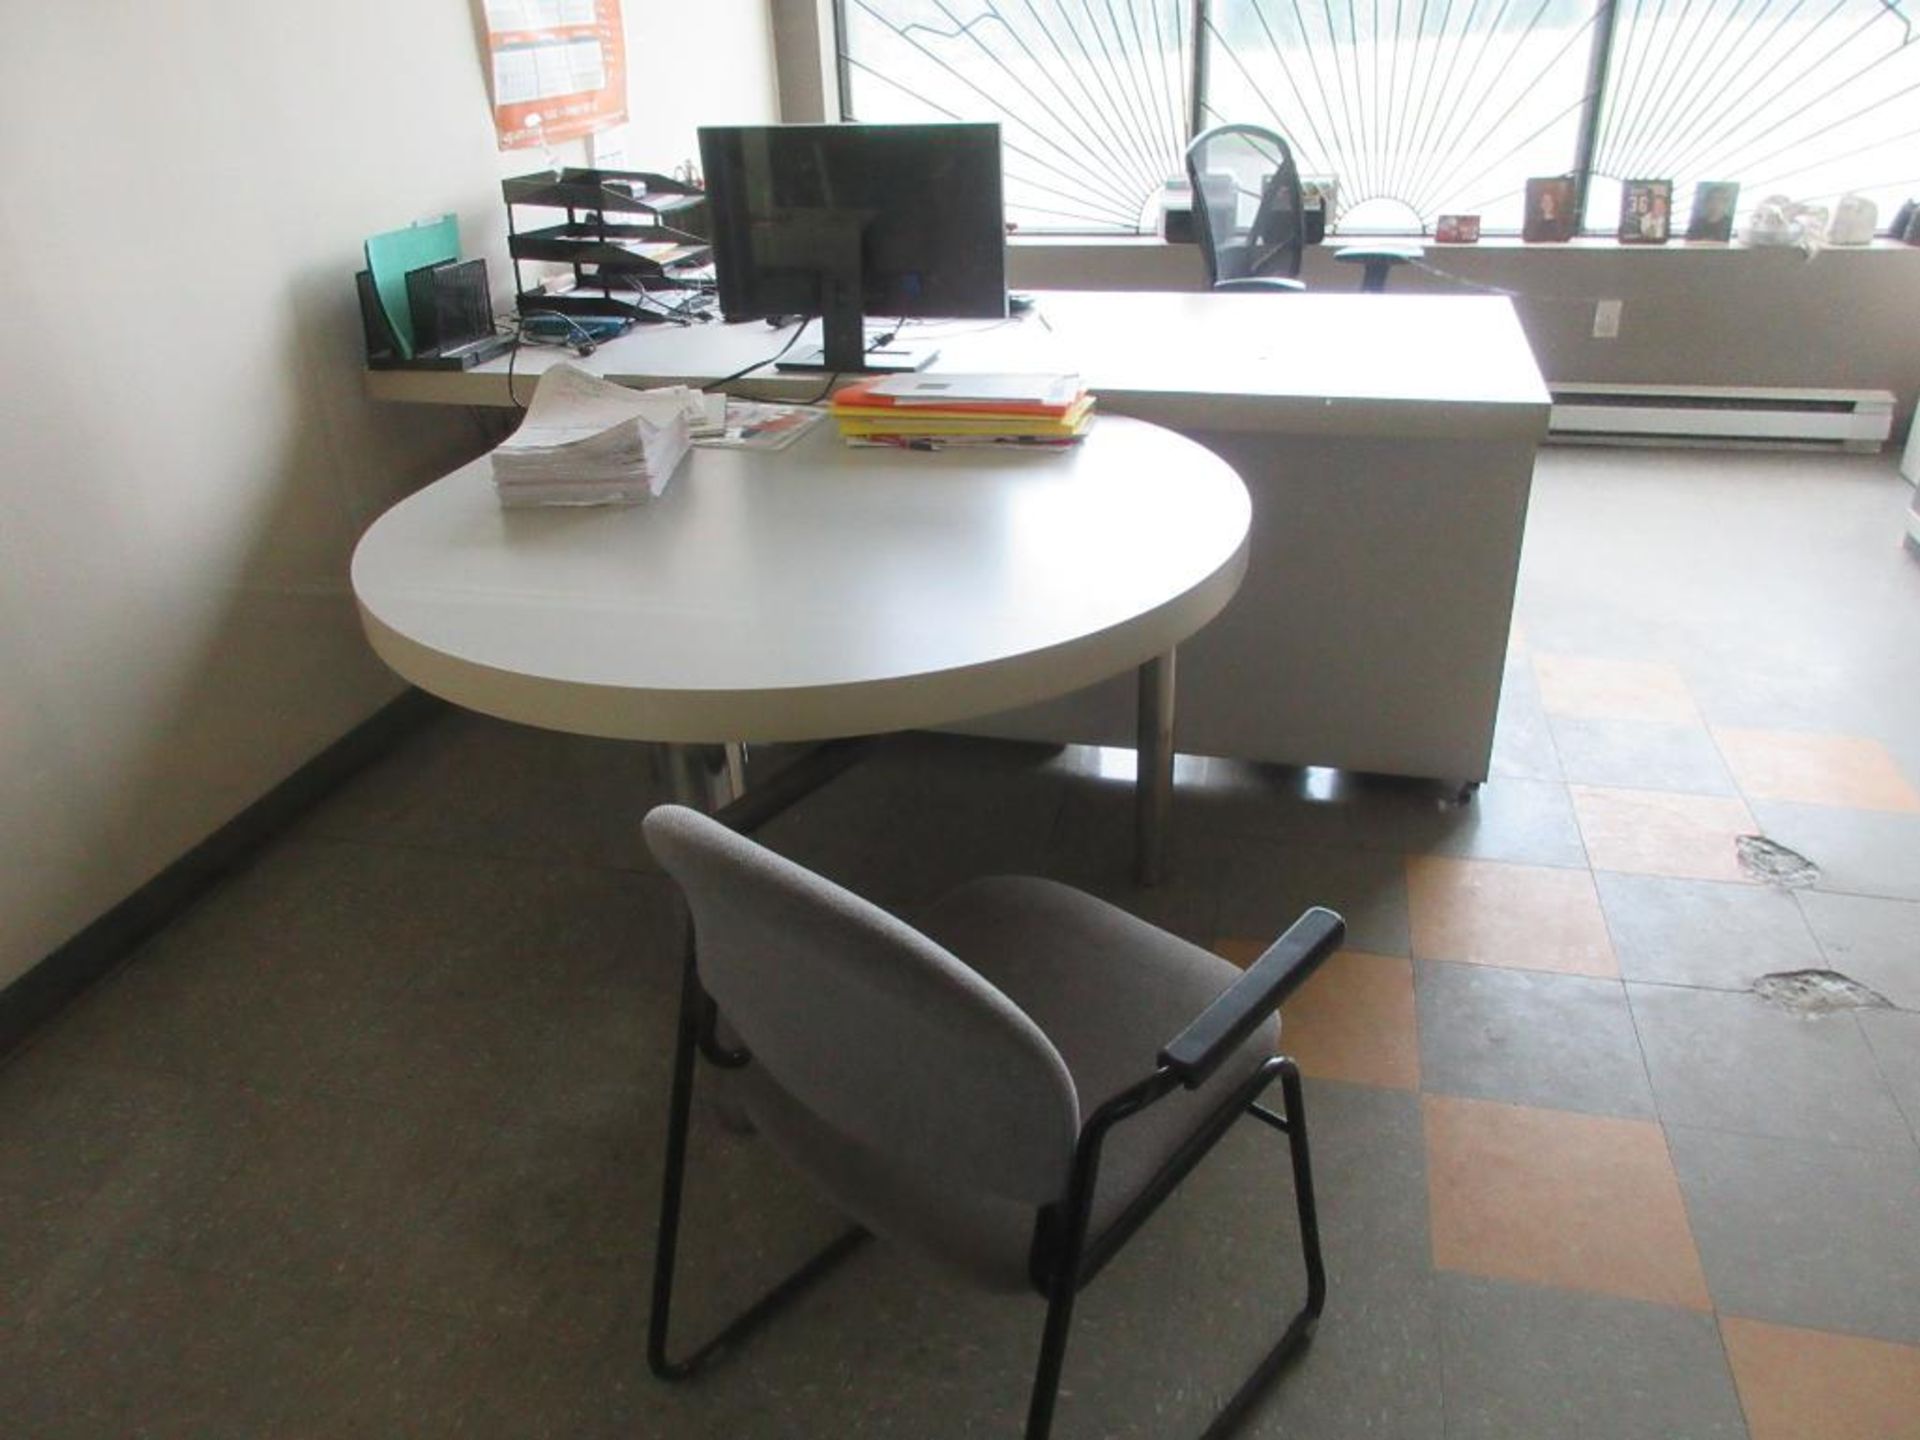 CONTENTS OF 1 OFFICE INCL L SHAPED DESK, ROUND TABLE, 2 CHAIRS, 3 FILE CABINETS AND 1 BOOKCASE (NO E - Image 6 of 6